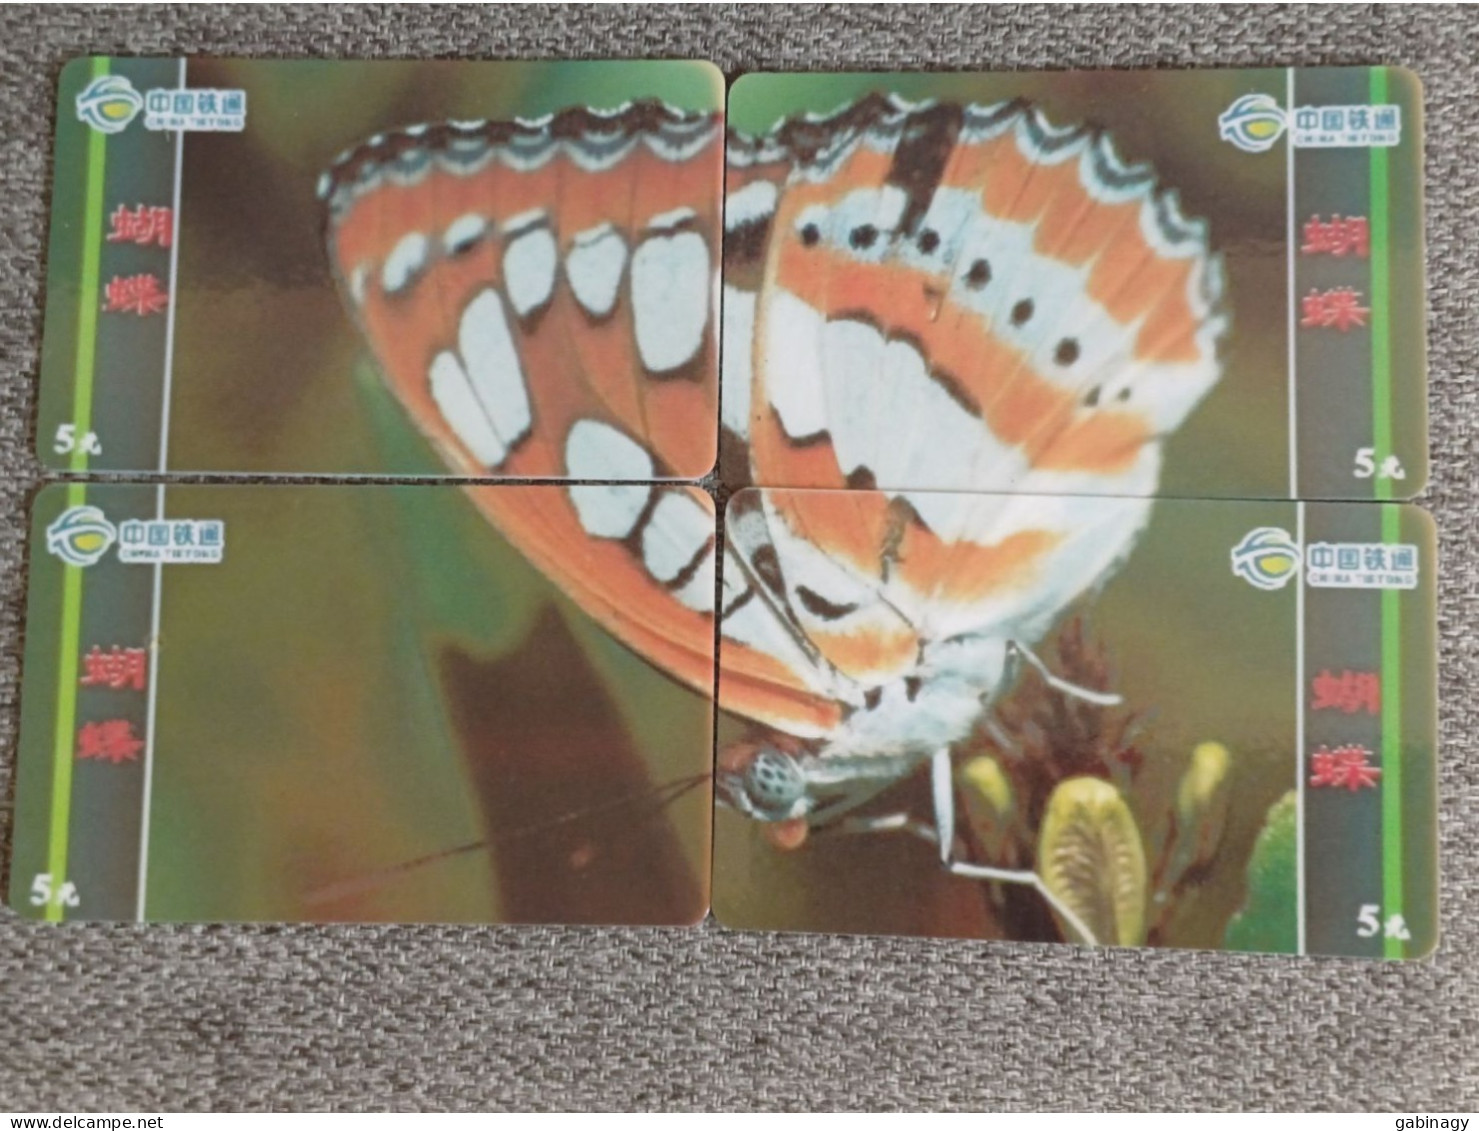 CHINA - BUTTERFLY-14 - PUZZLE SET OF 4 CARDS - China